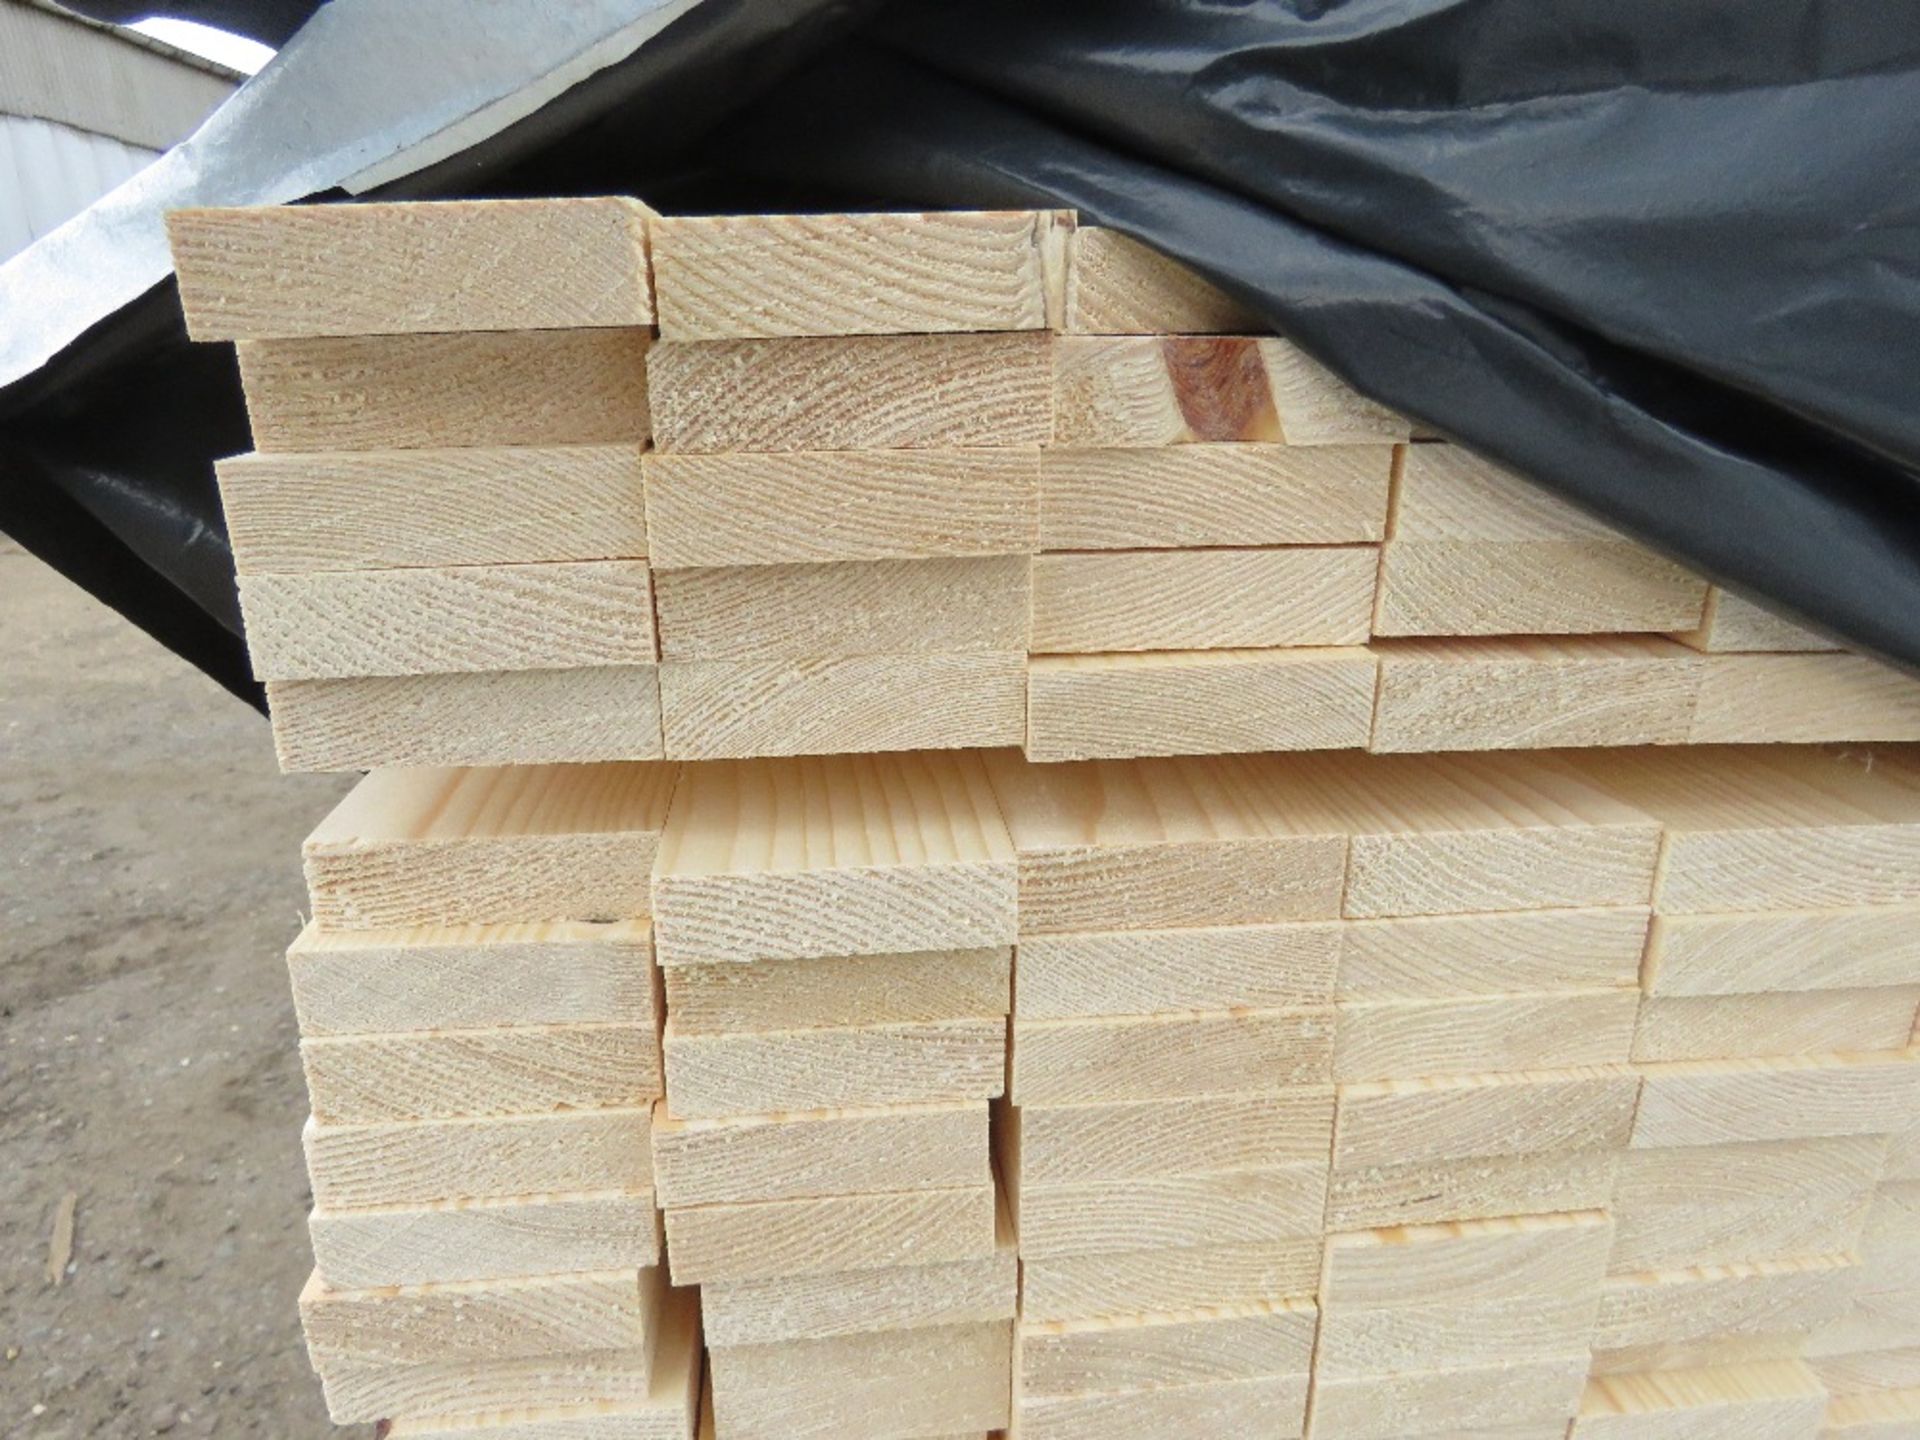 PACK OF UNTREATED TIMBER SLATS/RAIL 1.2M LENGTH X 70MM X 20MM APPROX. - Image 3 of 3